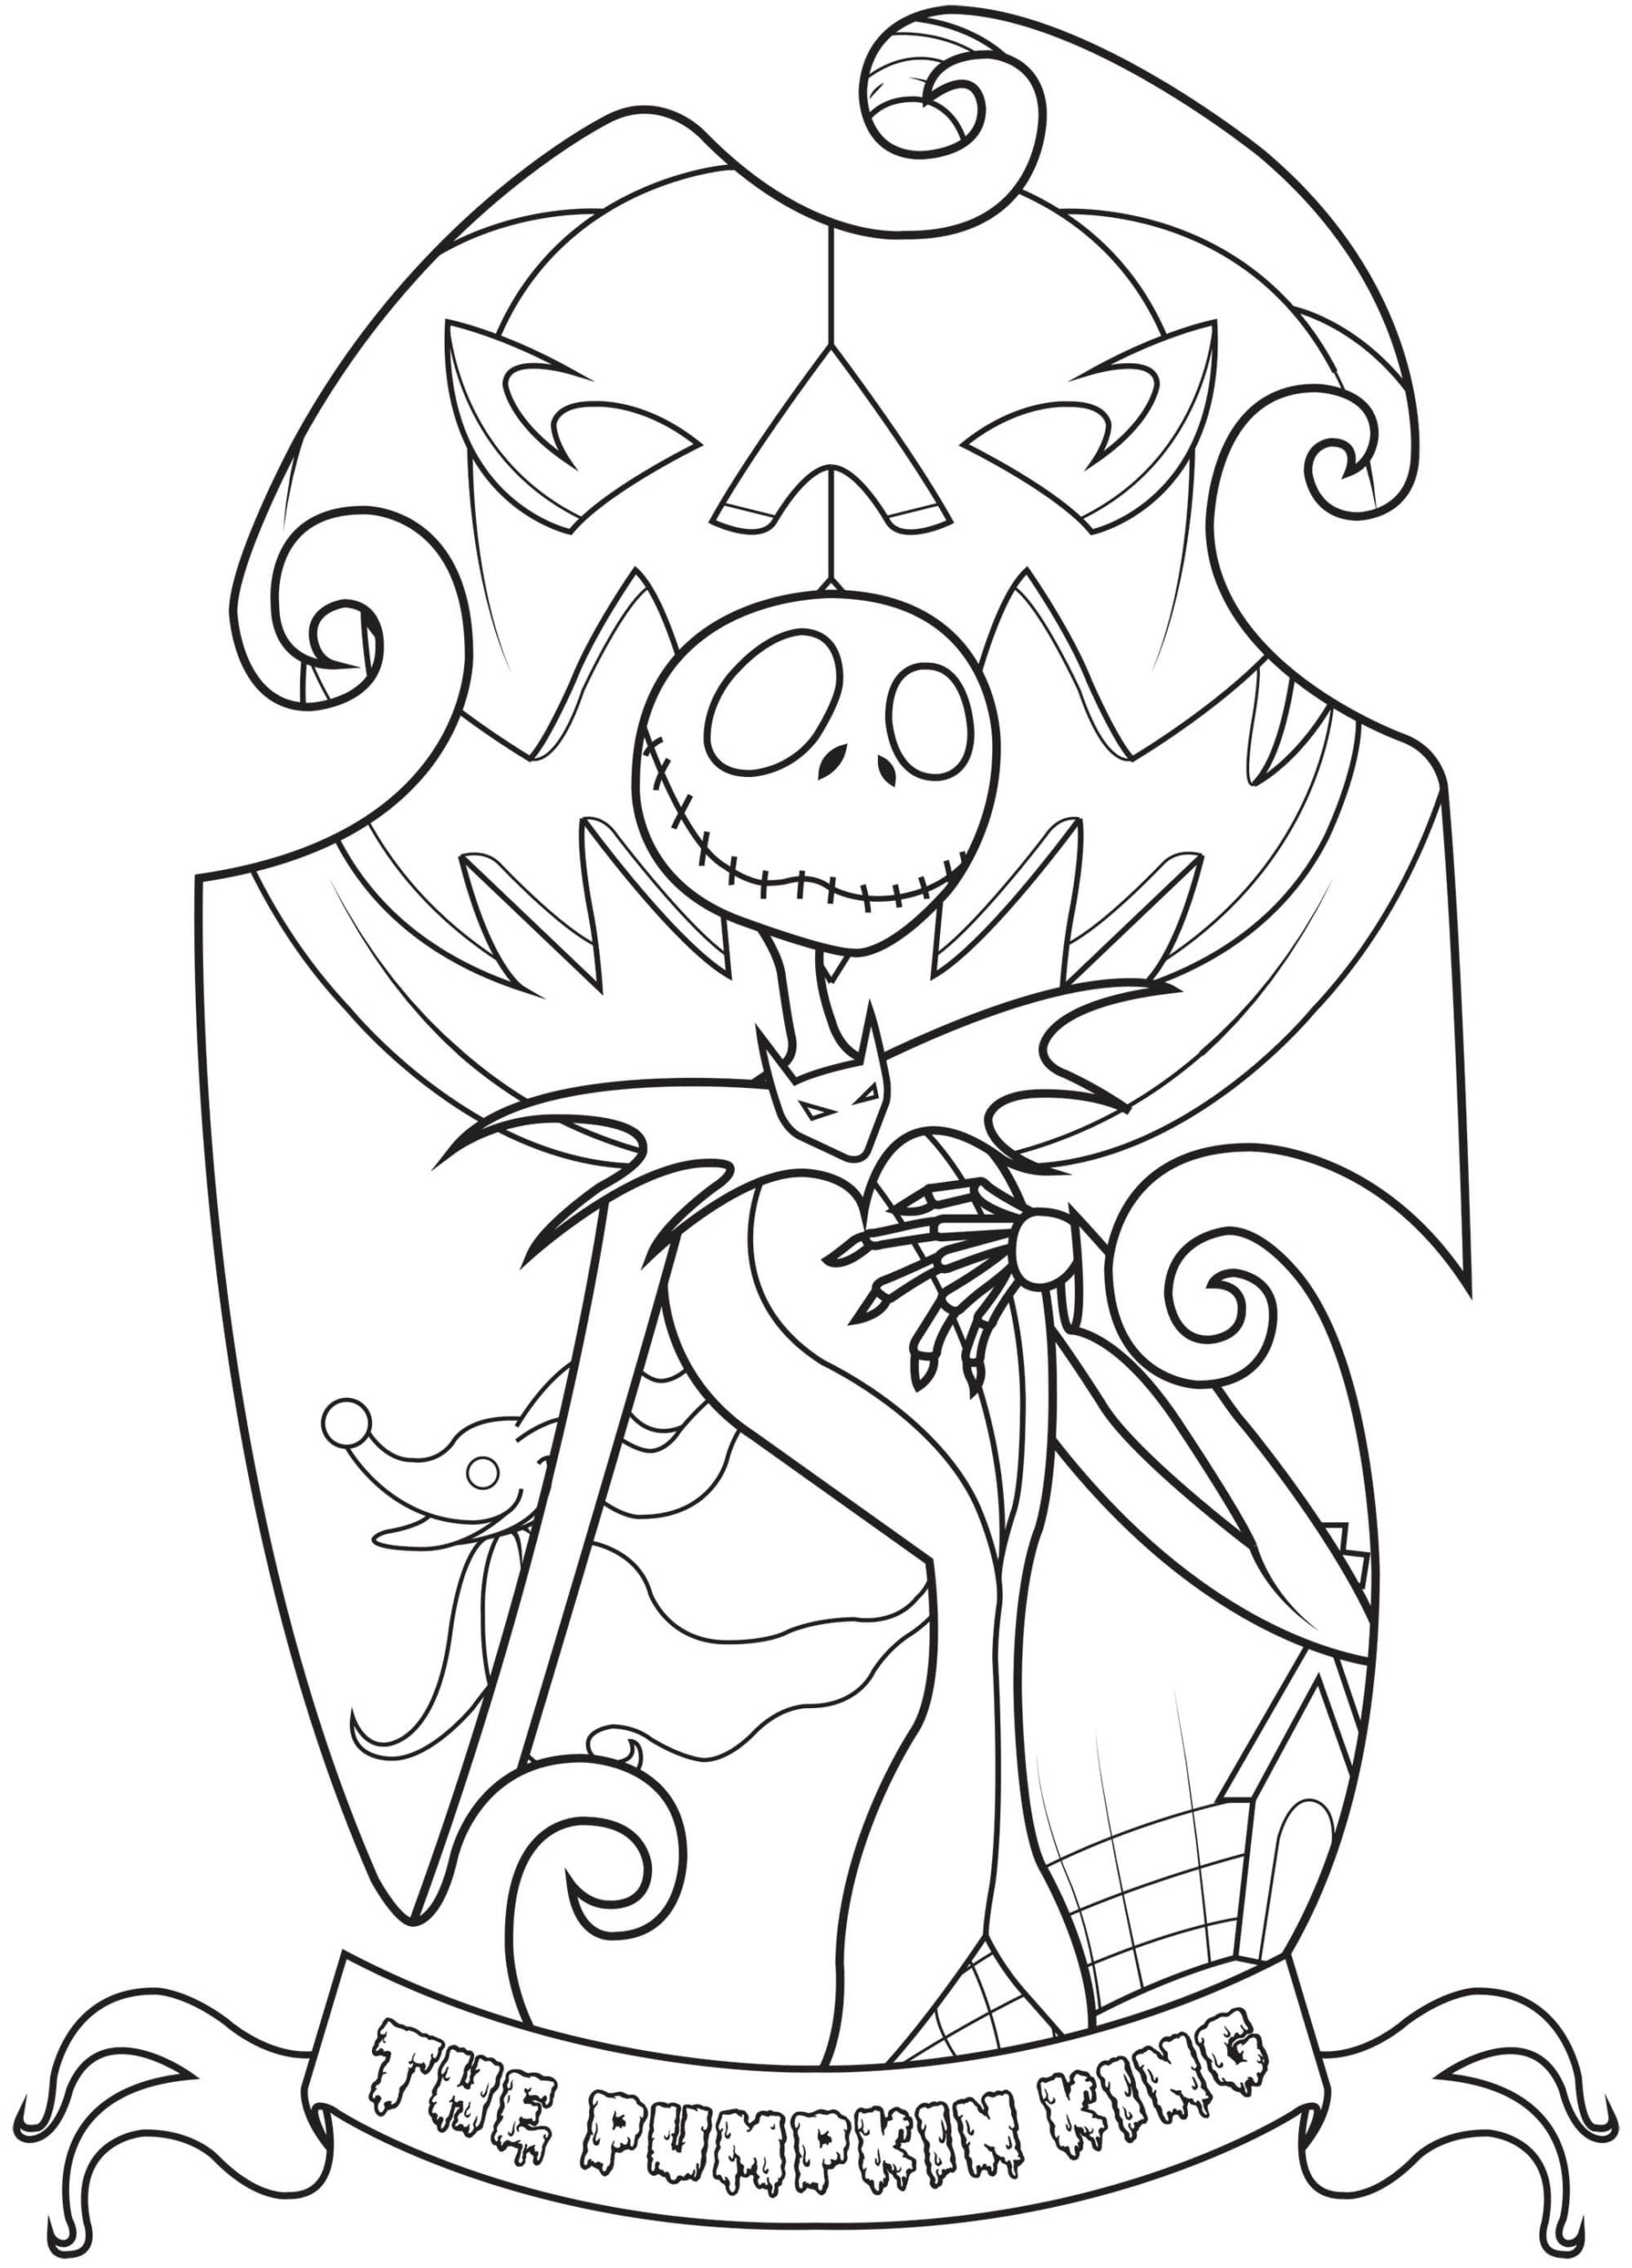 Nightmare Before Christmas Coloring Pages Download and Print